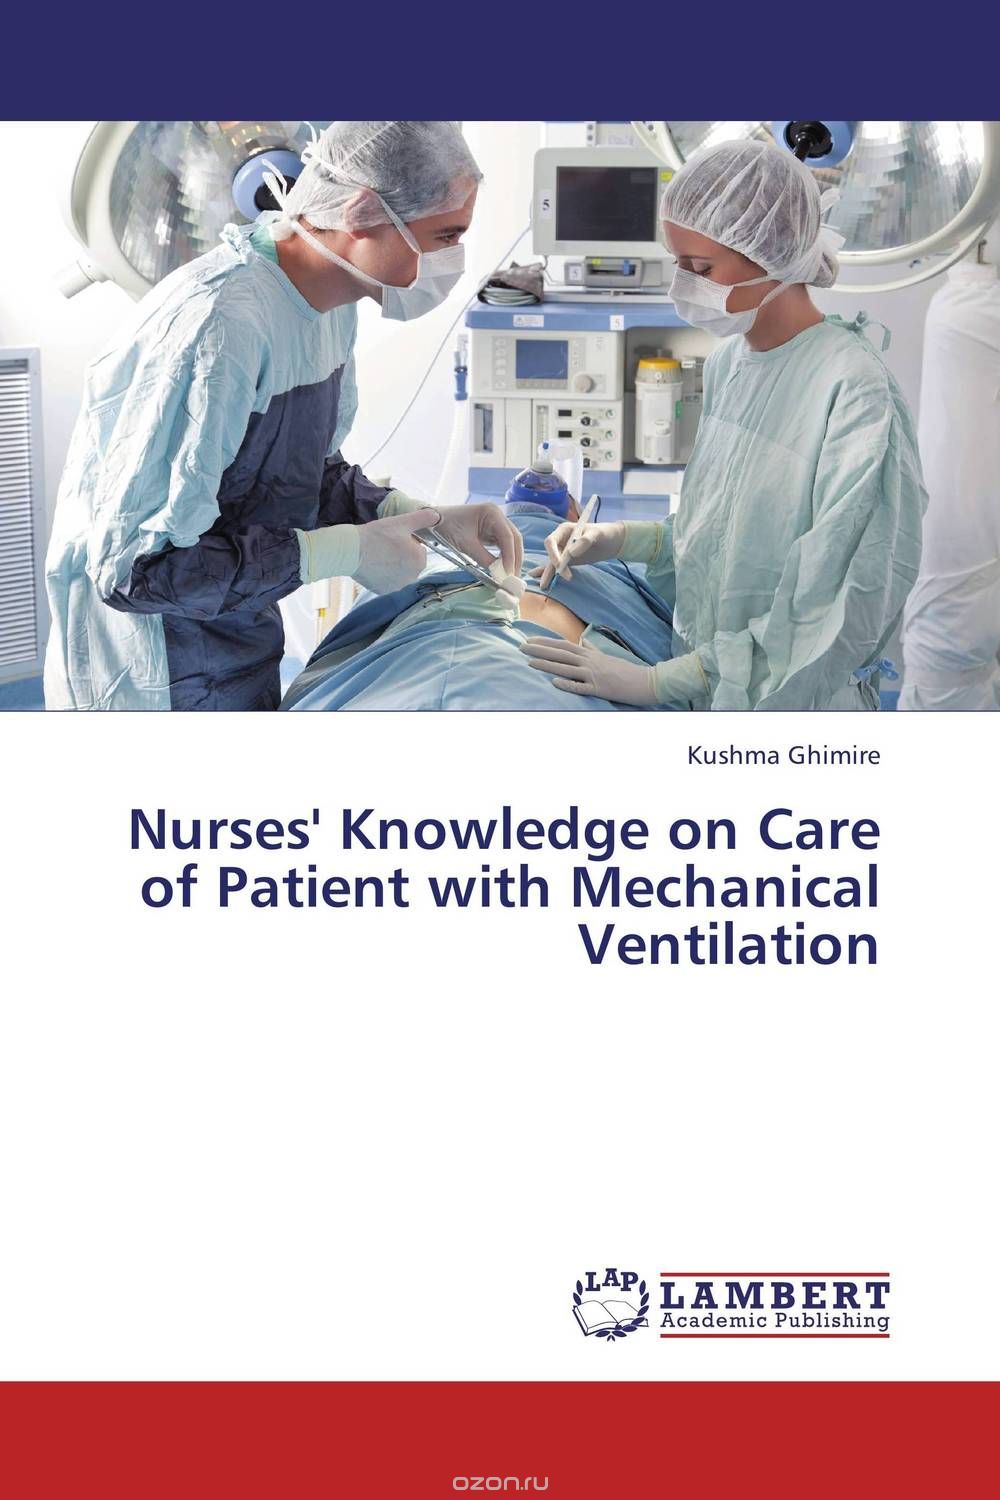 Nurses' Knowledge on Care of Patient with Mechanical Ventilation